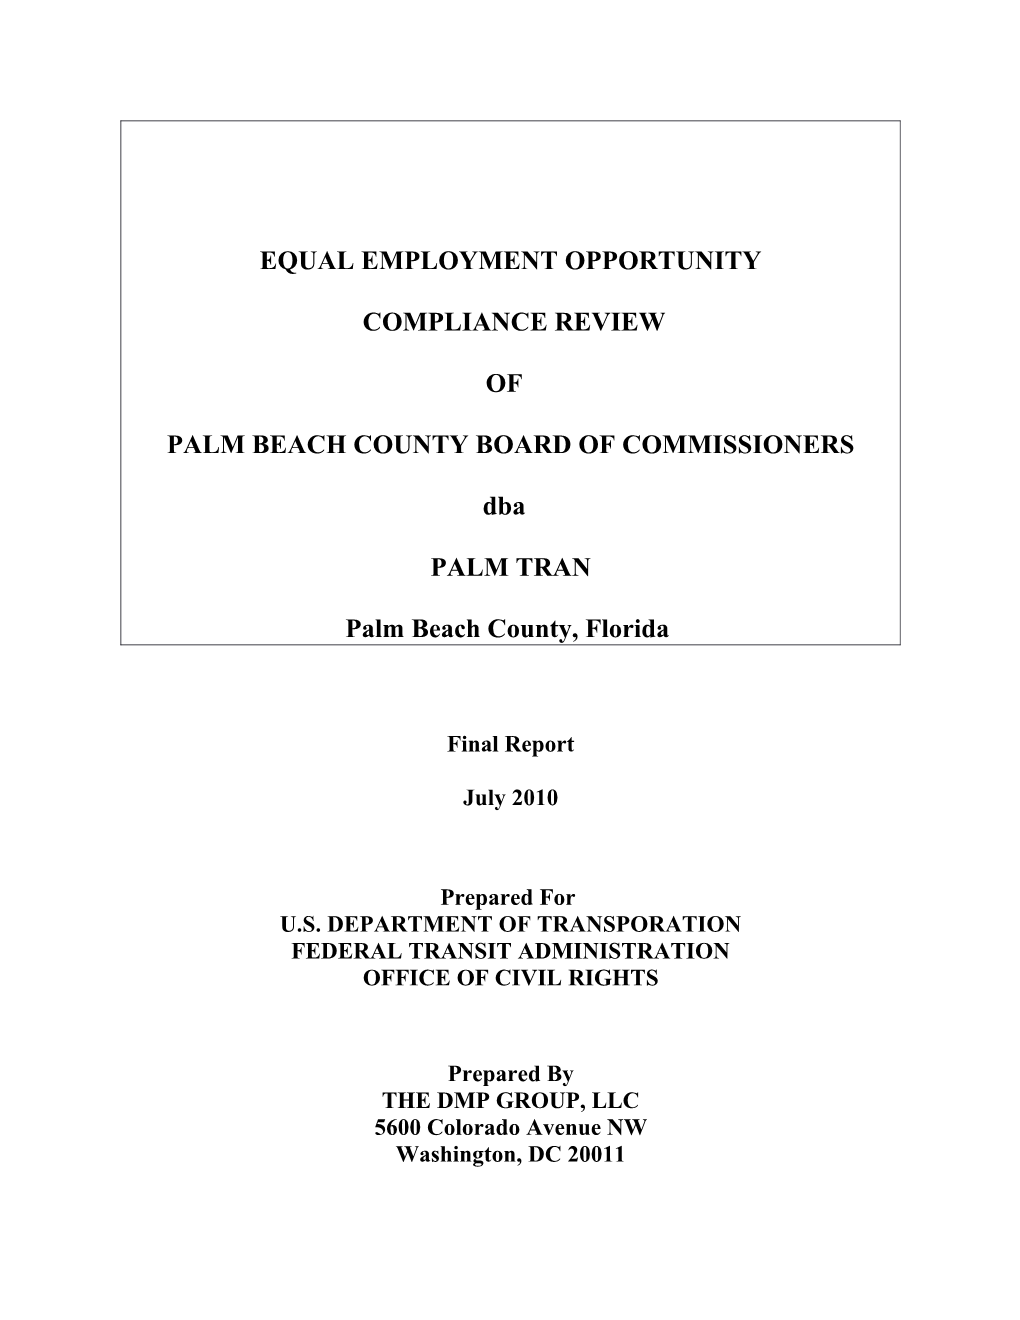 Palm Beach County Board of Commissioners